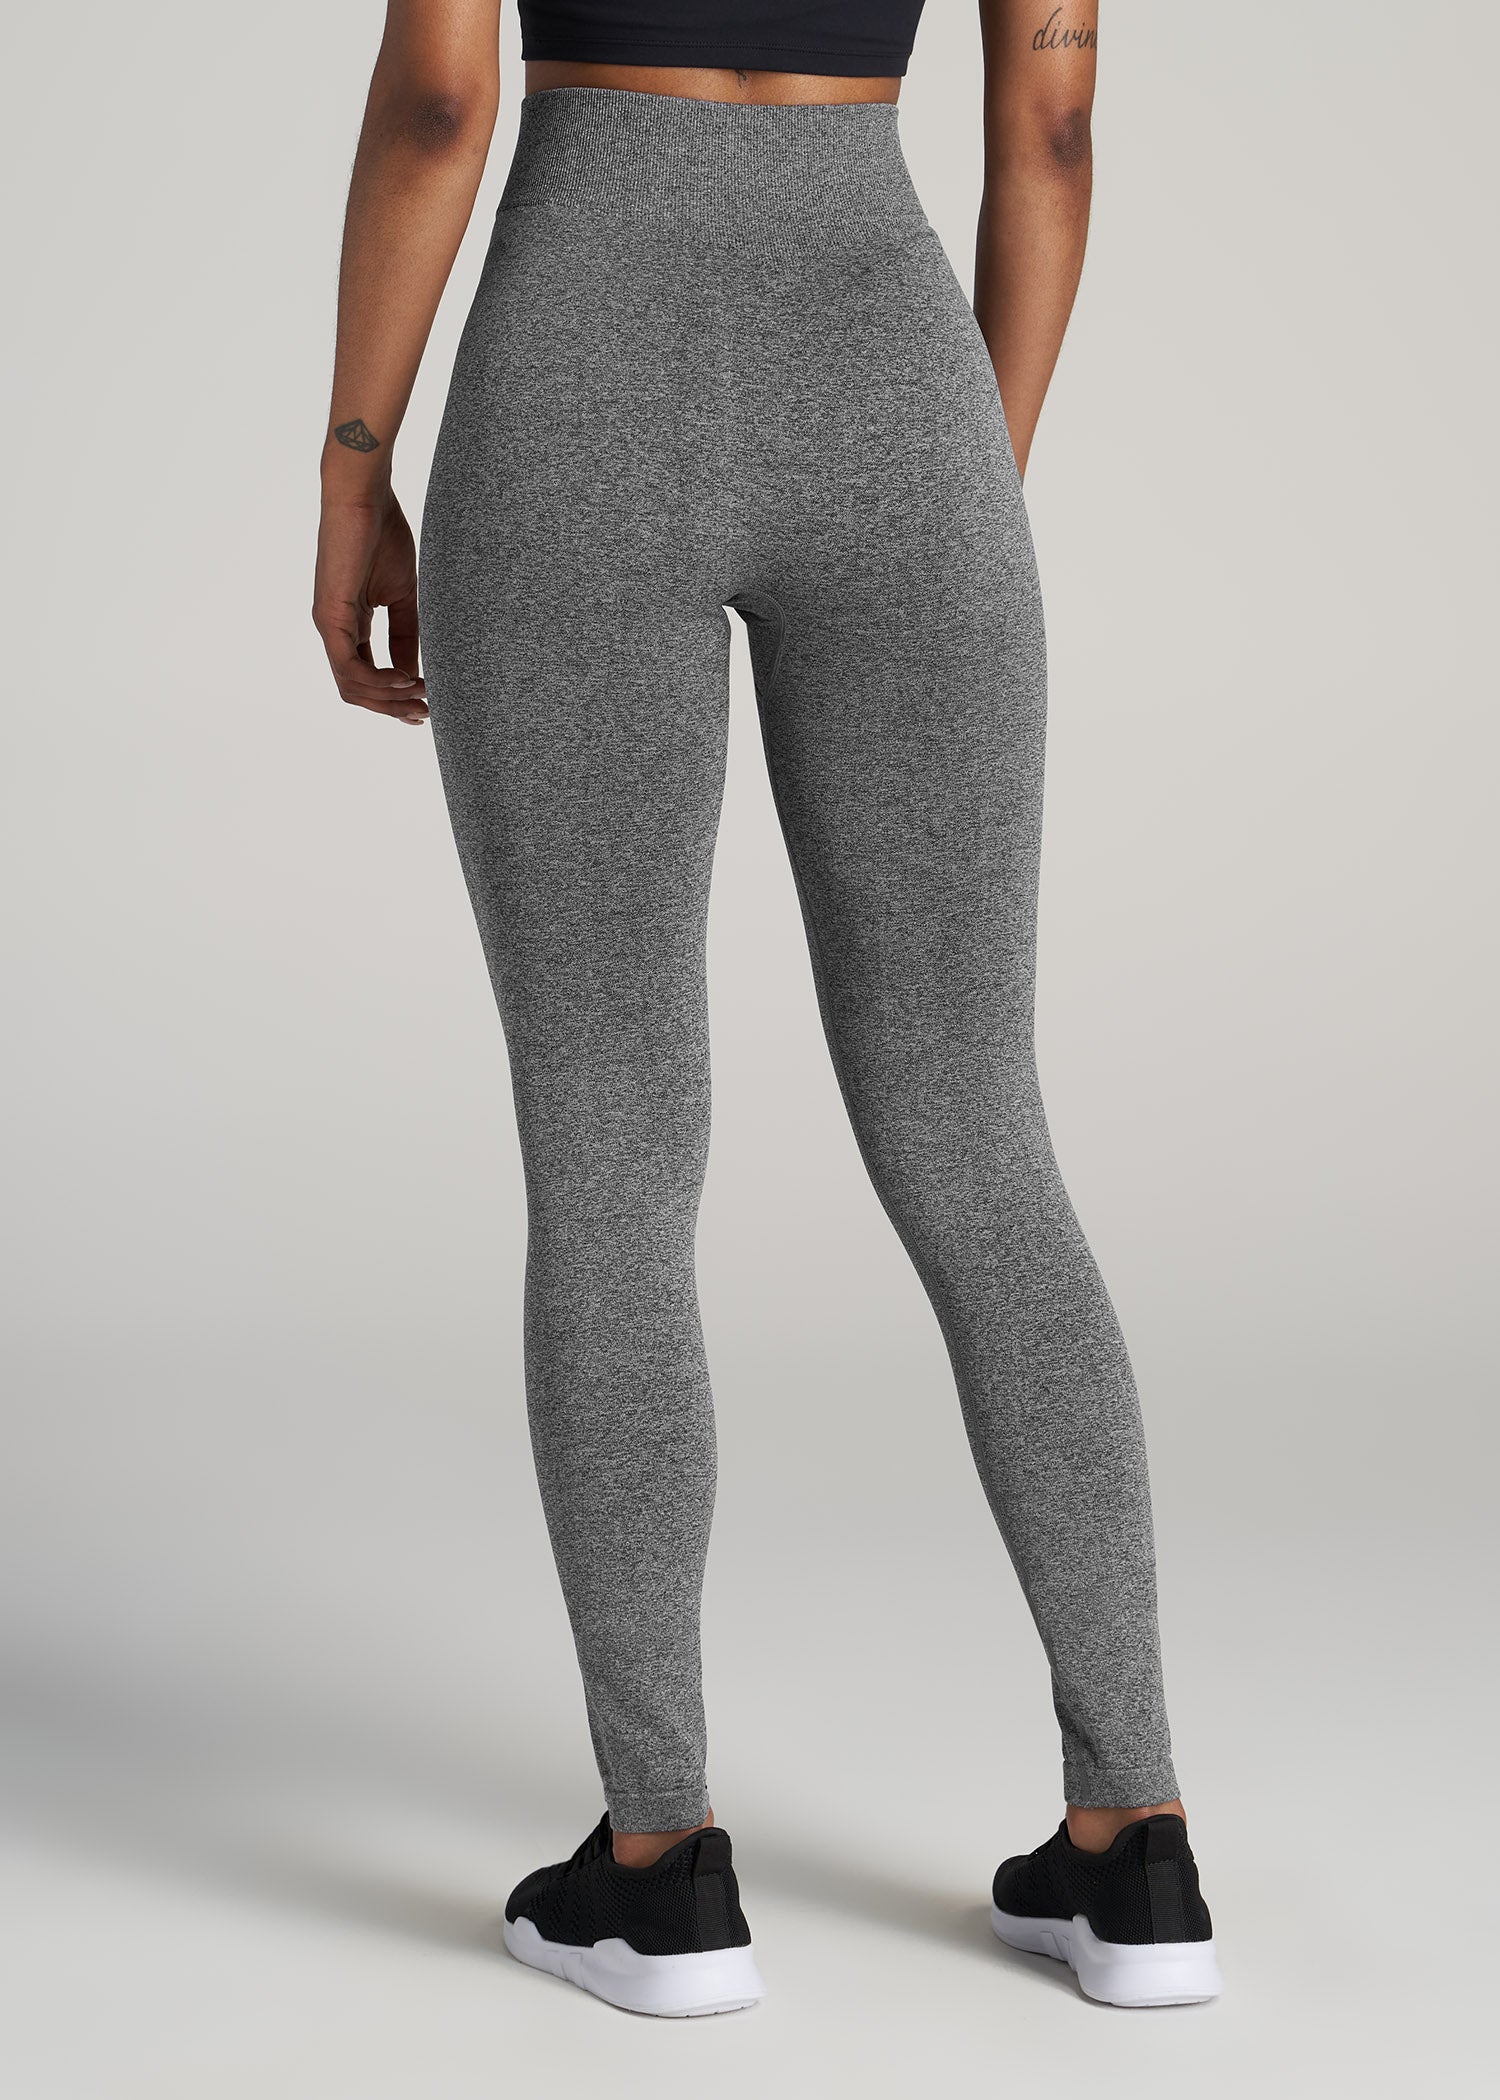 Seamless leggings perfect pair to wear under clothing or by itself